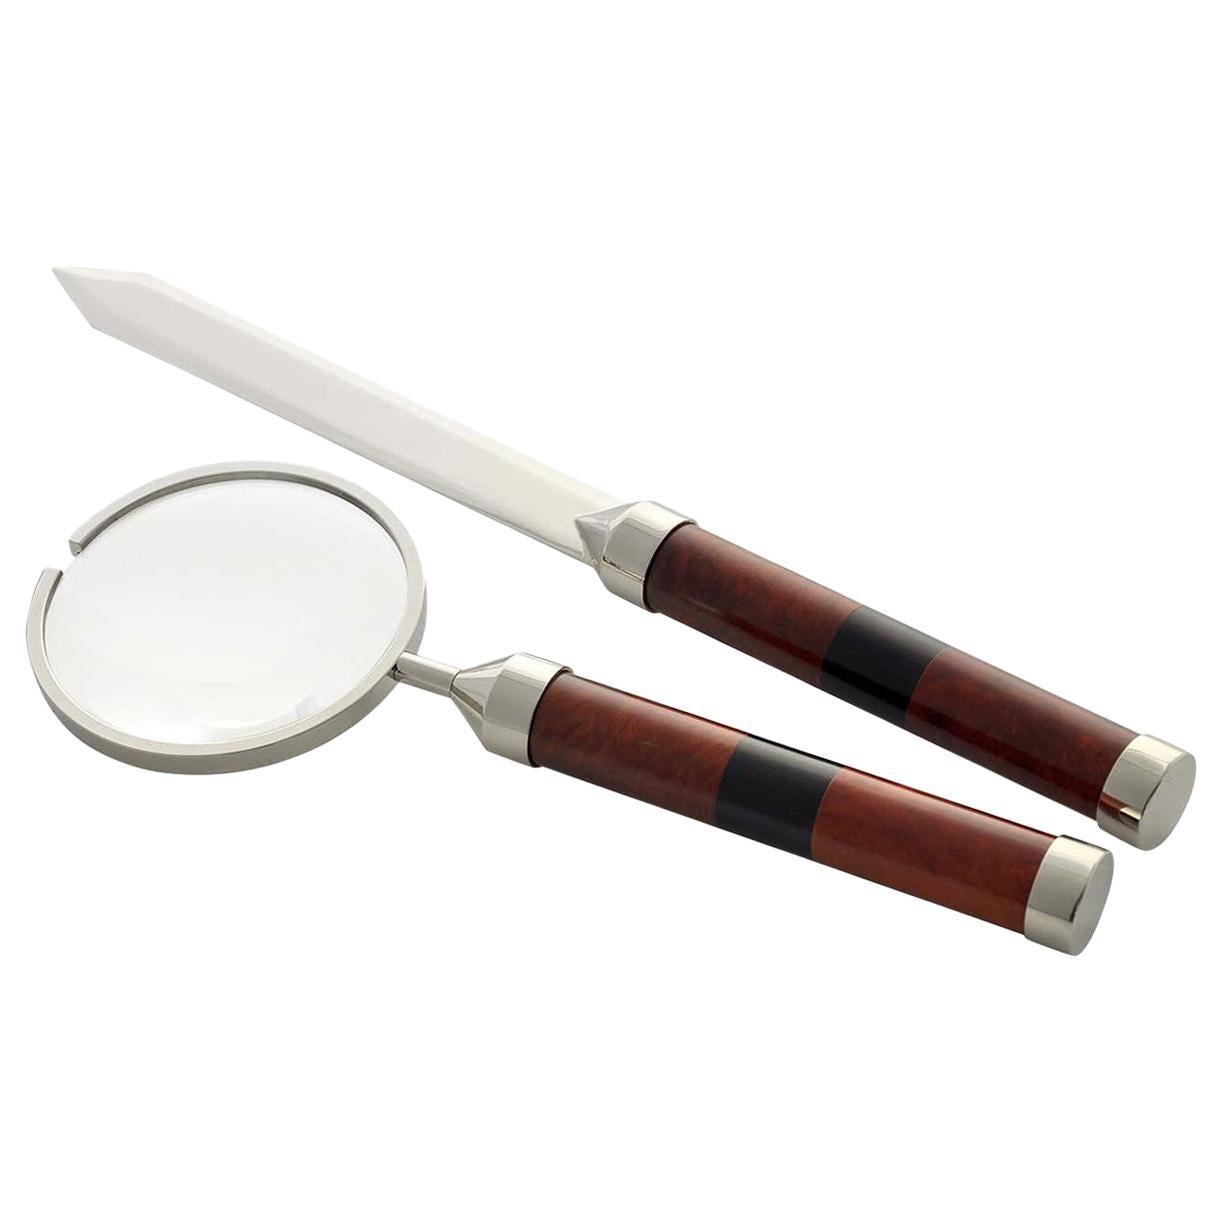 Essenze Magnifying Glass and Letter Opener Set by Nino Basso